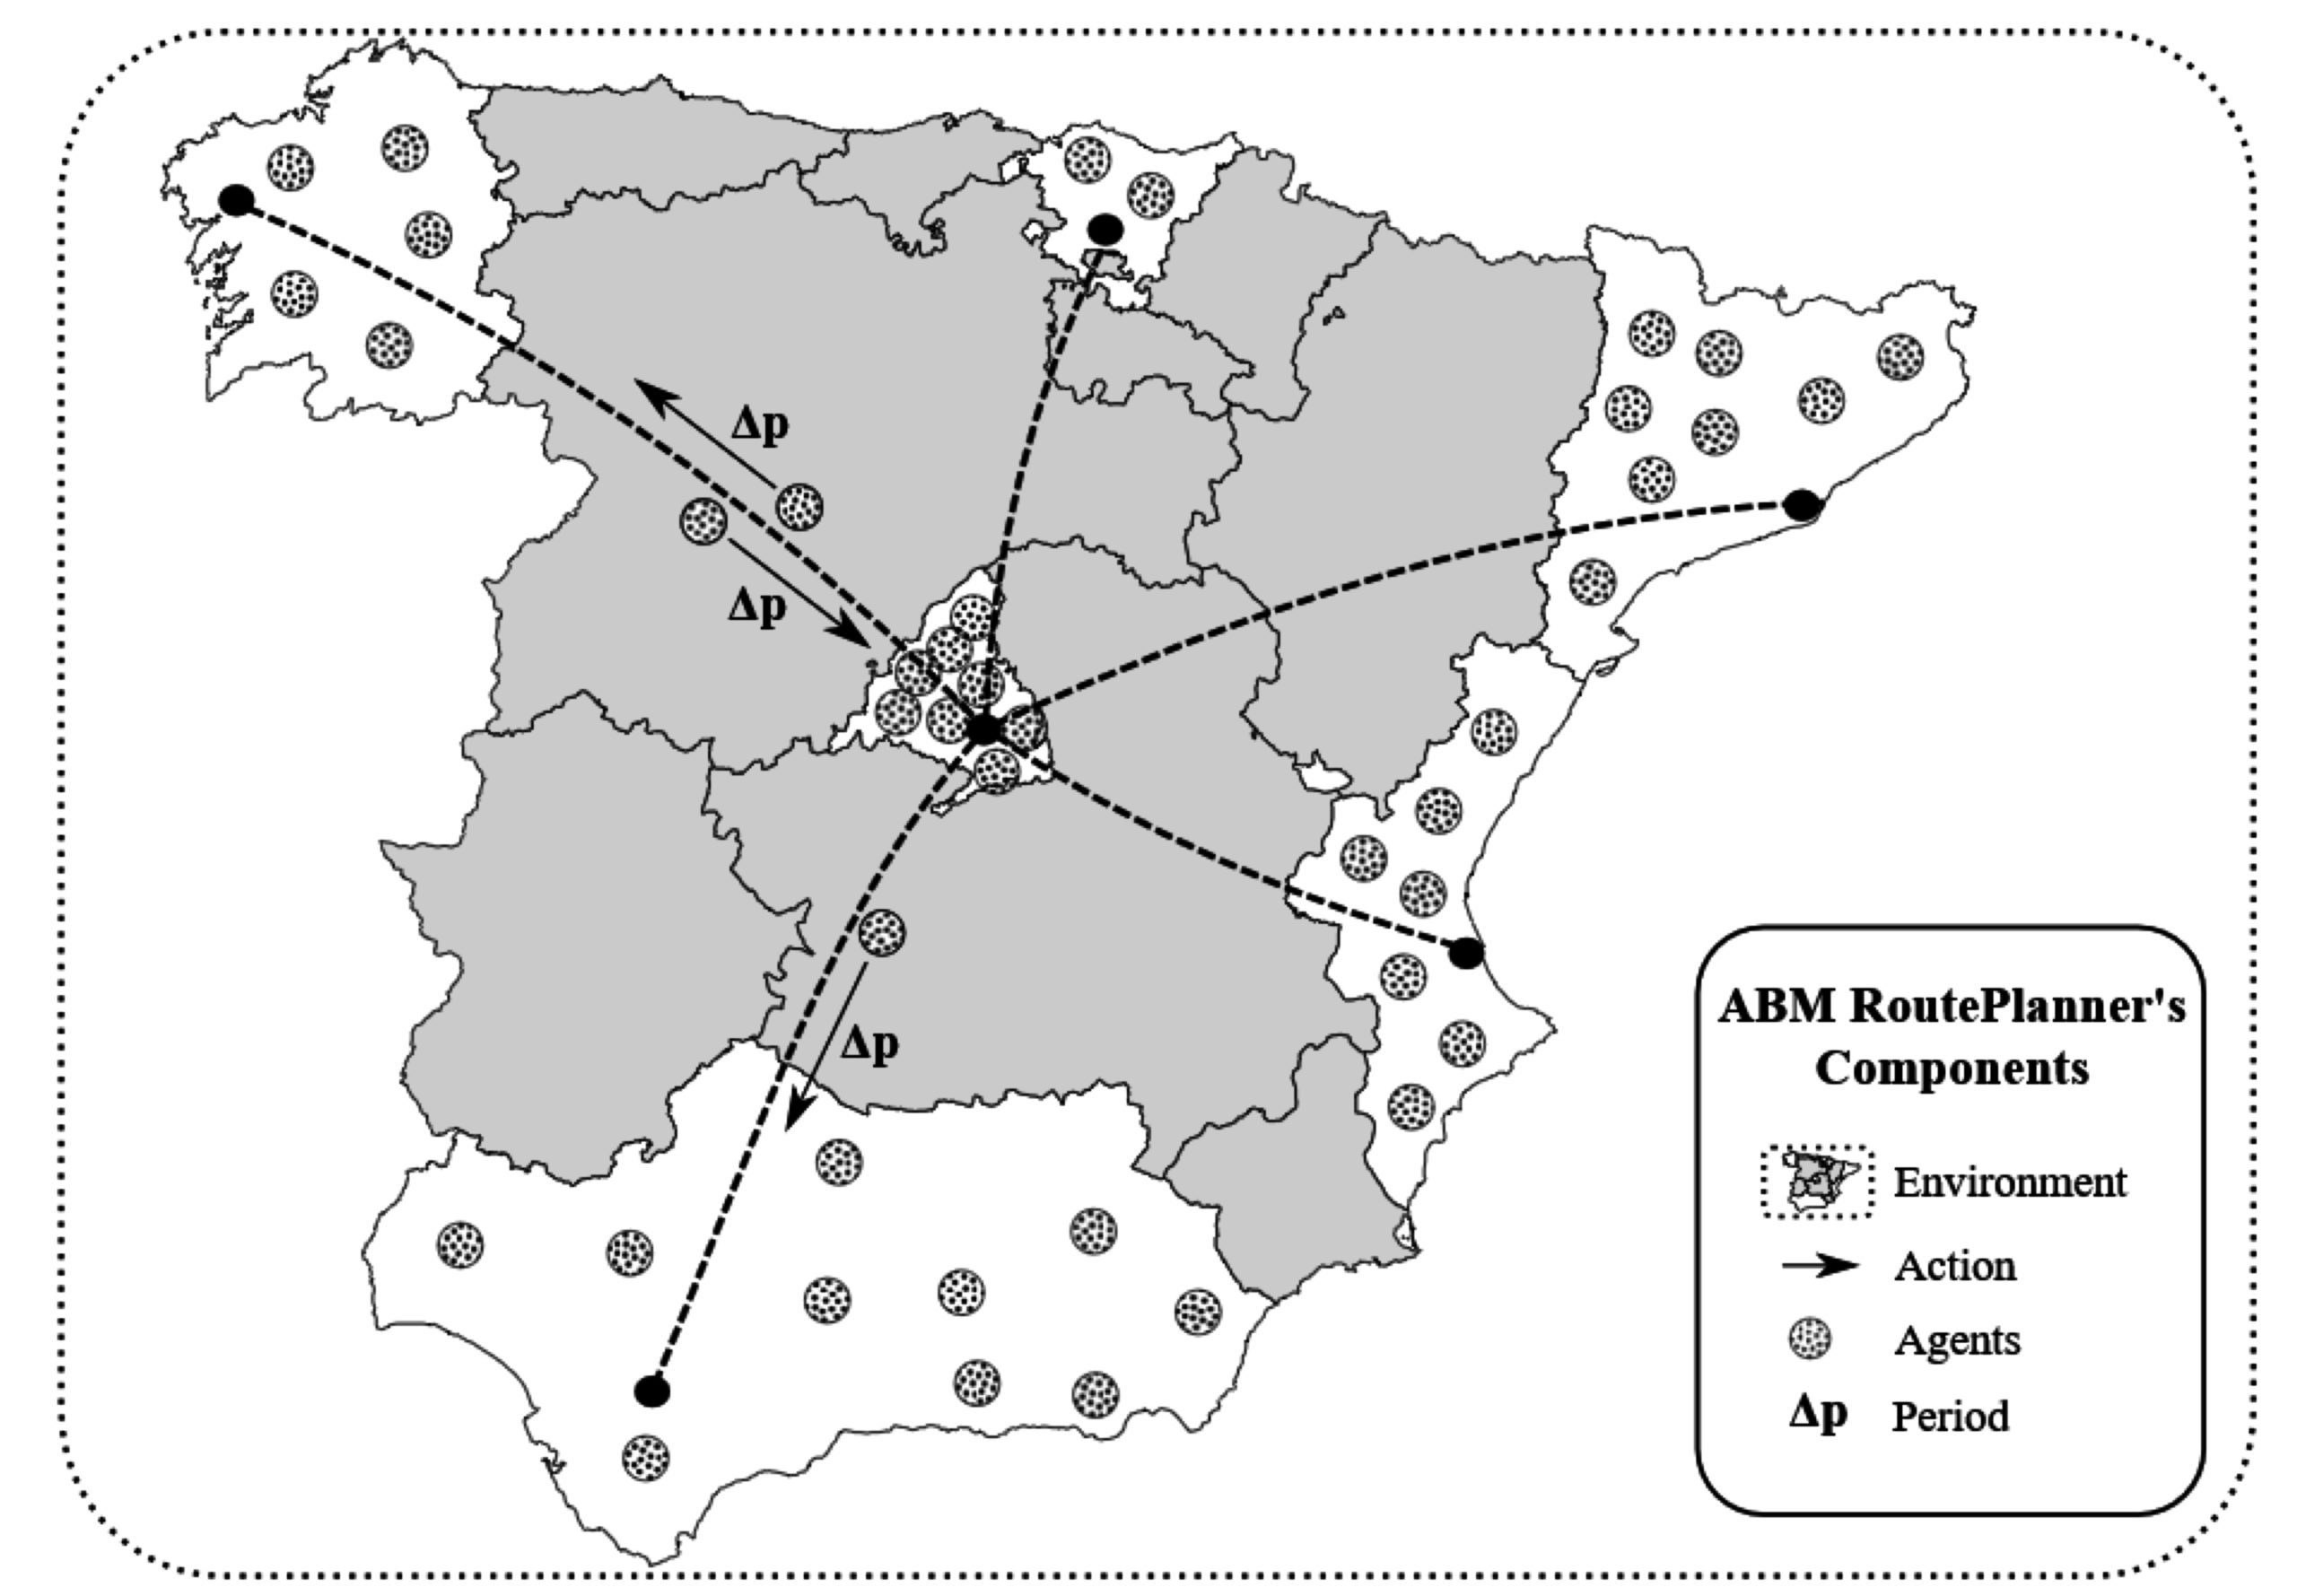 ABM RoutePlanner: An agent-based approach for suggesting preference-based routes in Spain